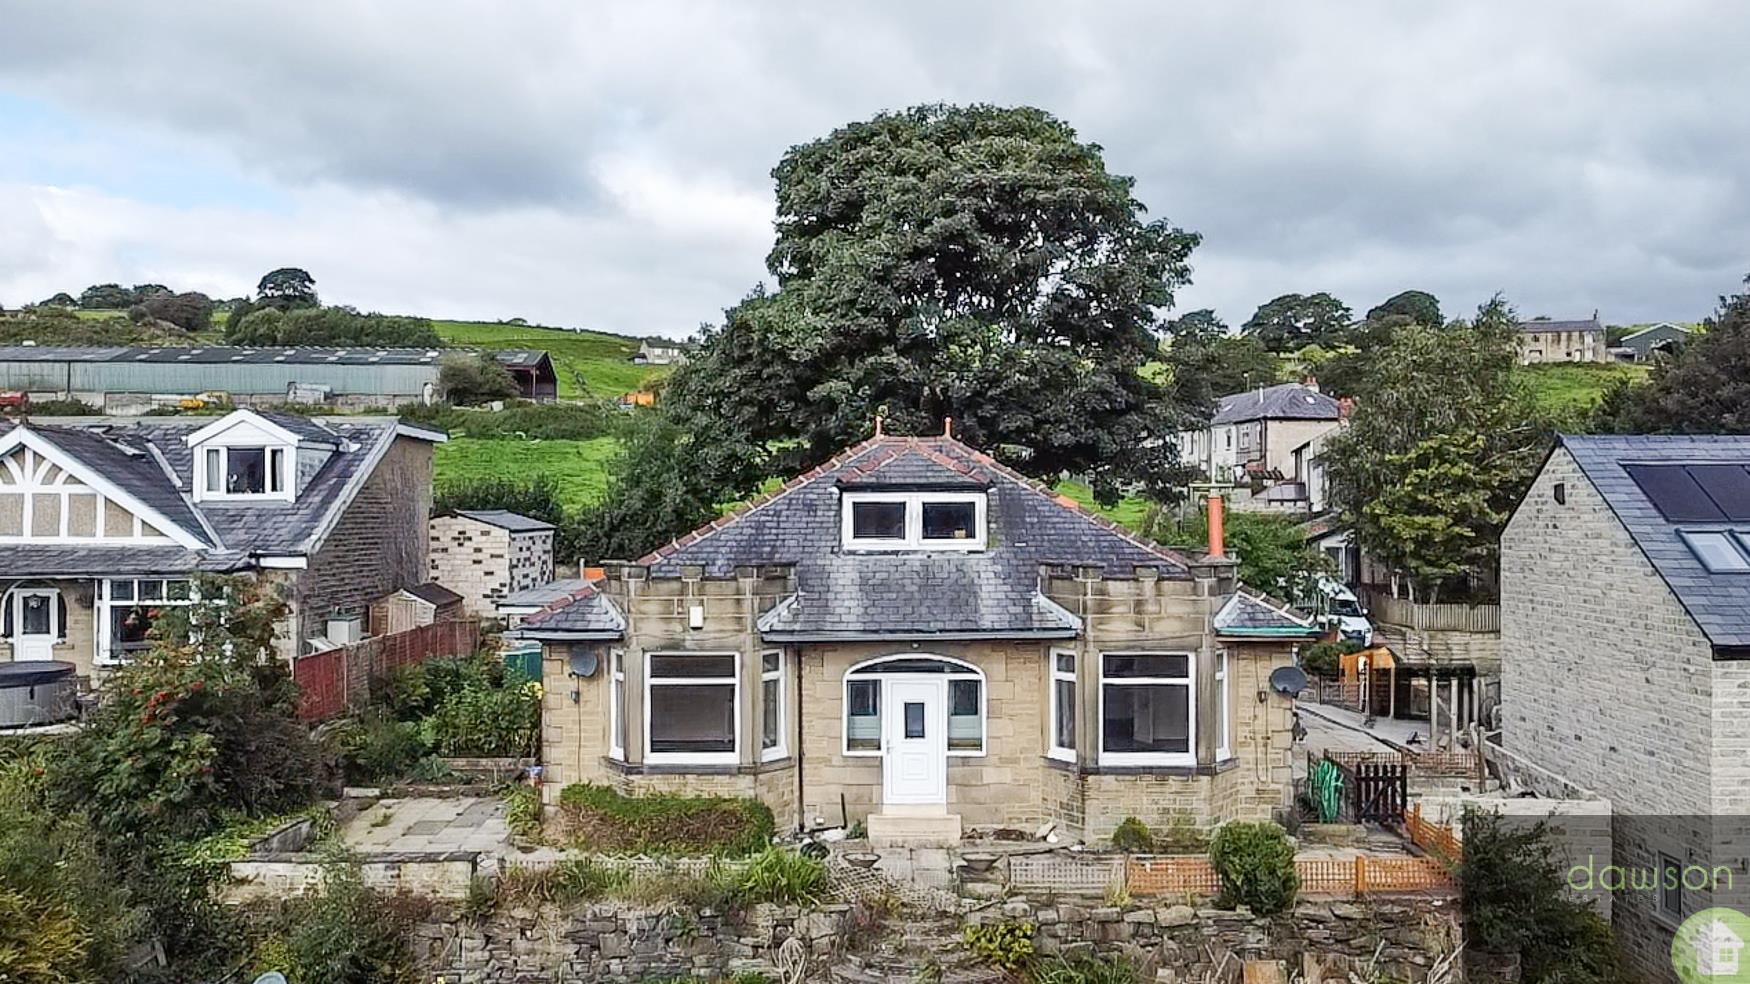 4 bed detached house to rent in Coach Road, Ripponden, HX6 